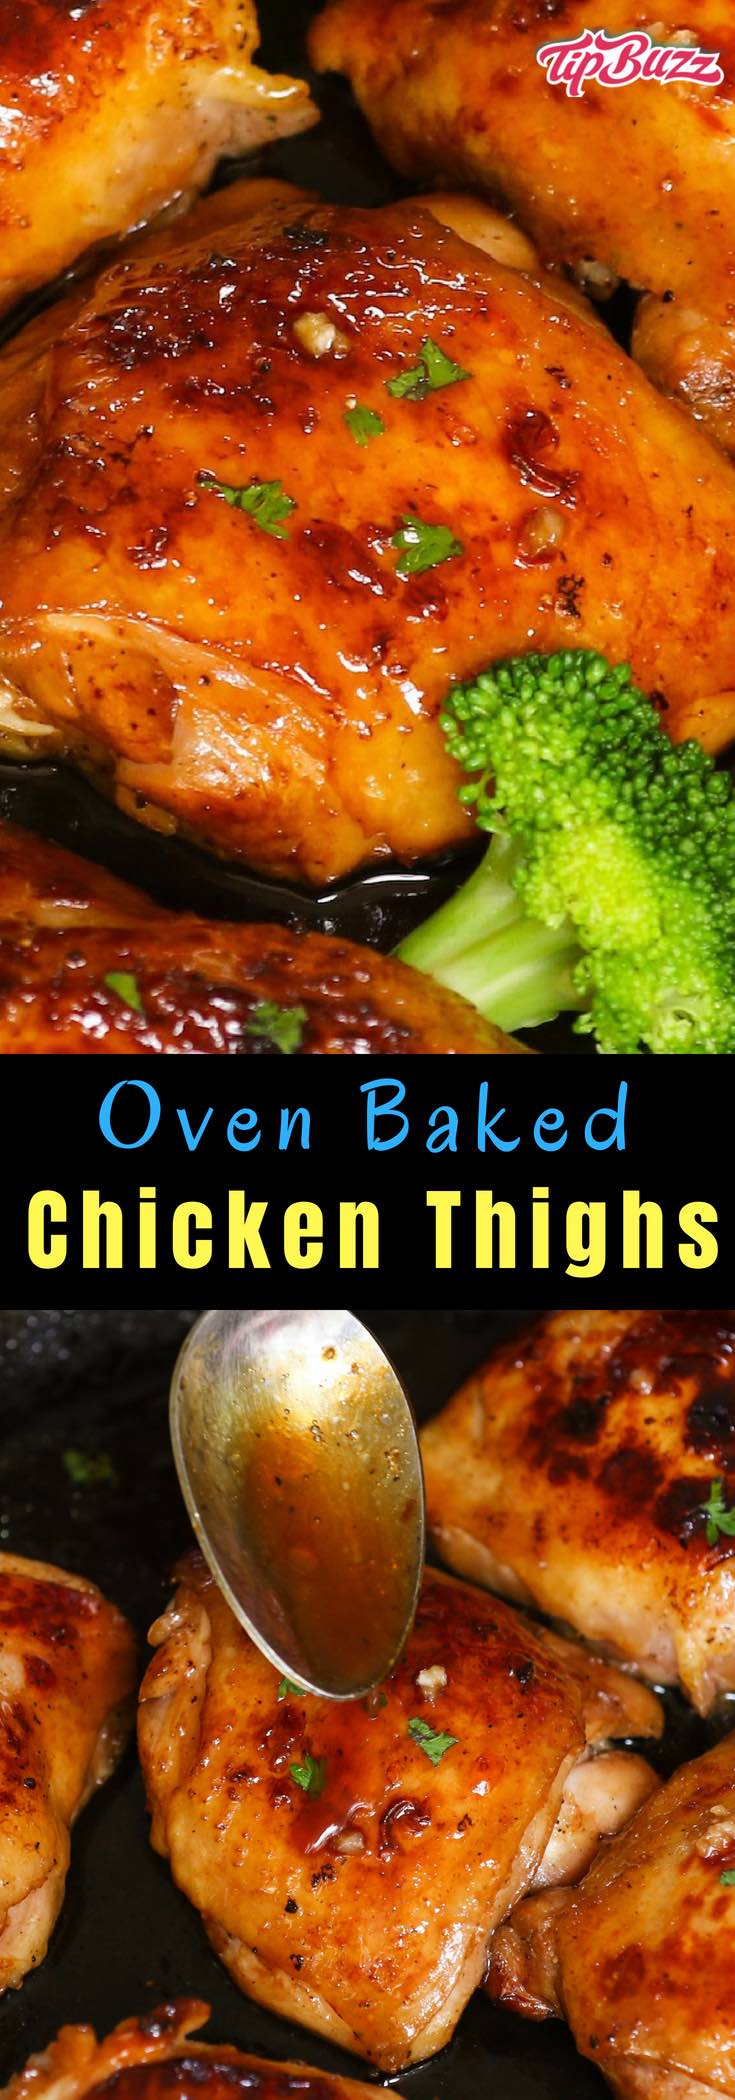 Oven Baked Chicken Thighs are juicy, tender and full of flavor. With a few tips and some simple ingredients, this never-dry chicken thighs with restaurant quality can be easily made at home!